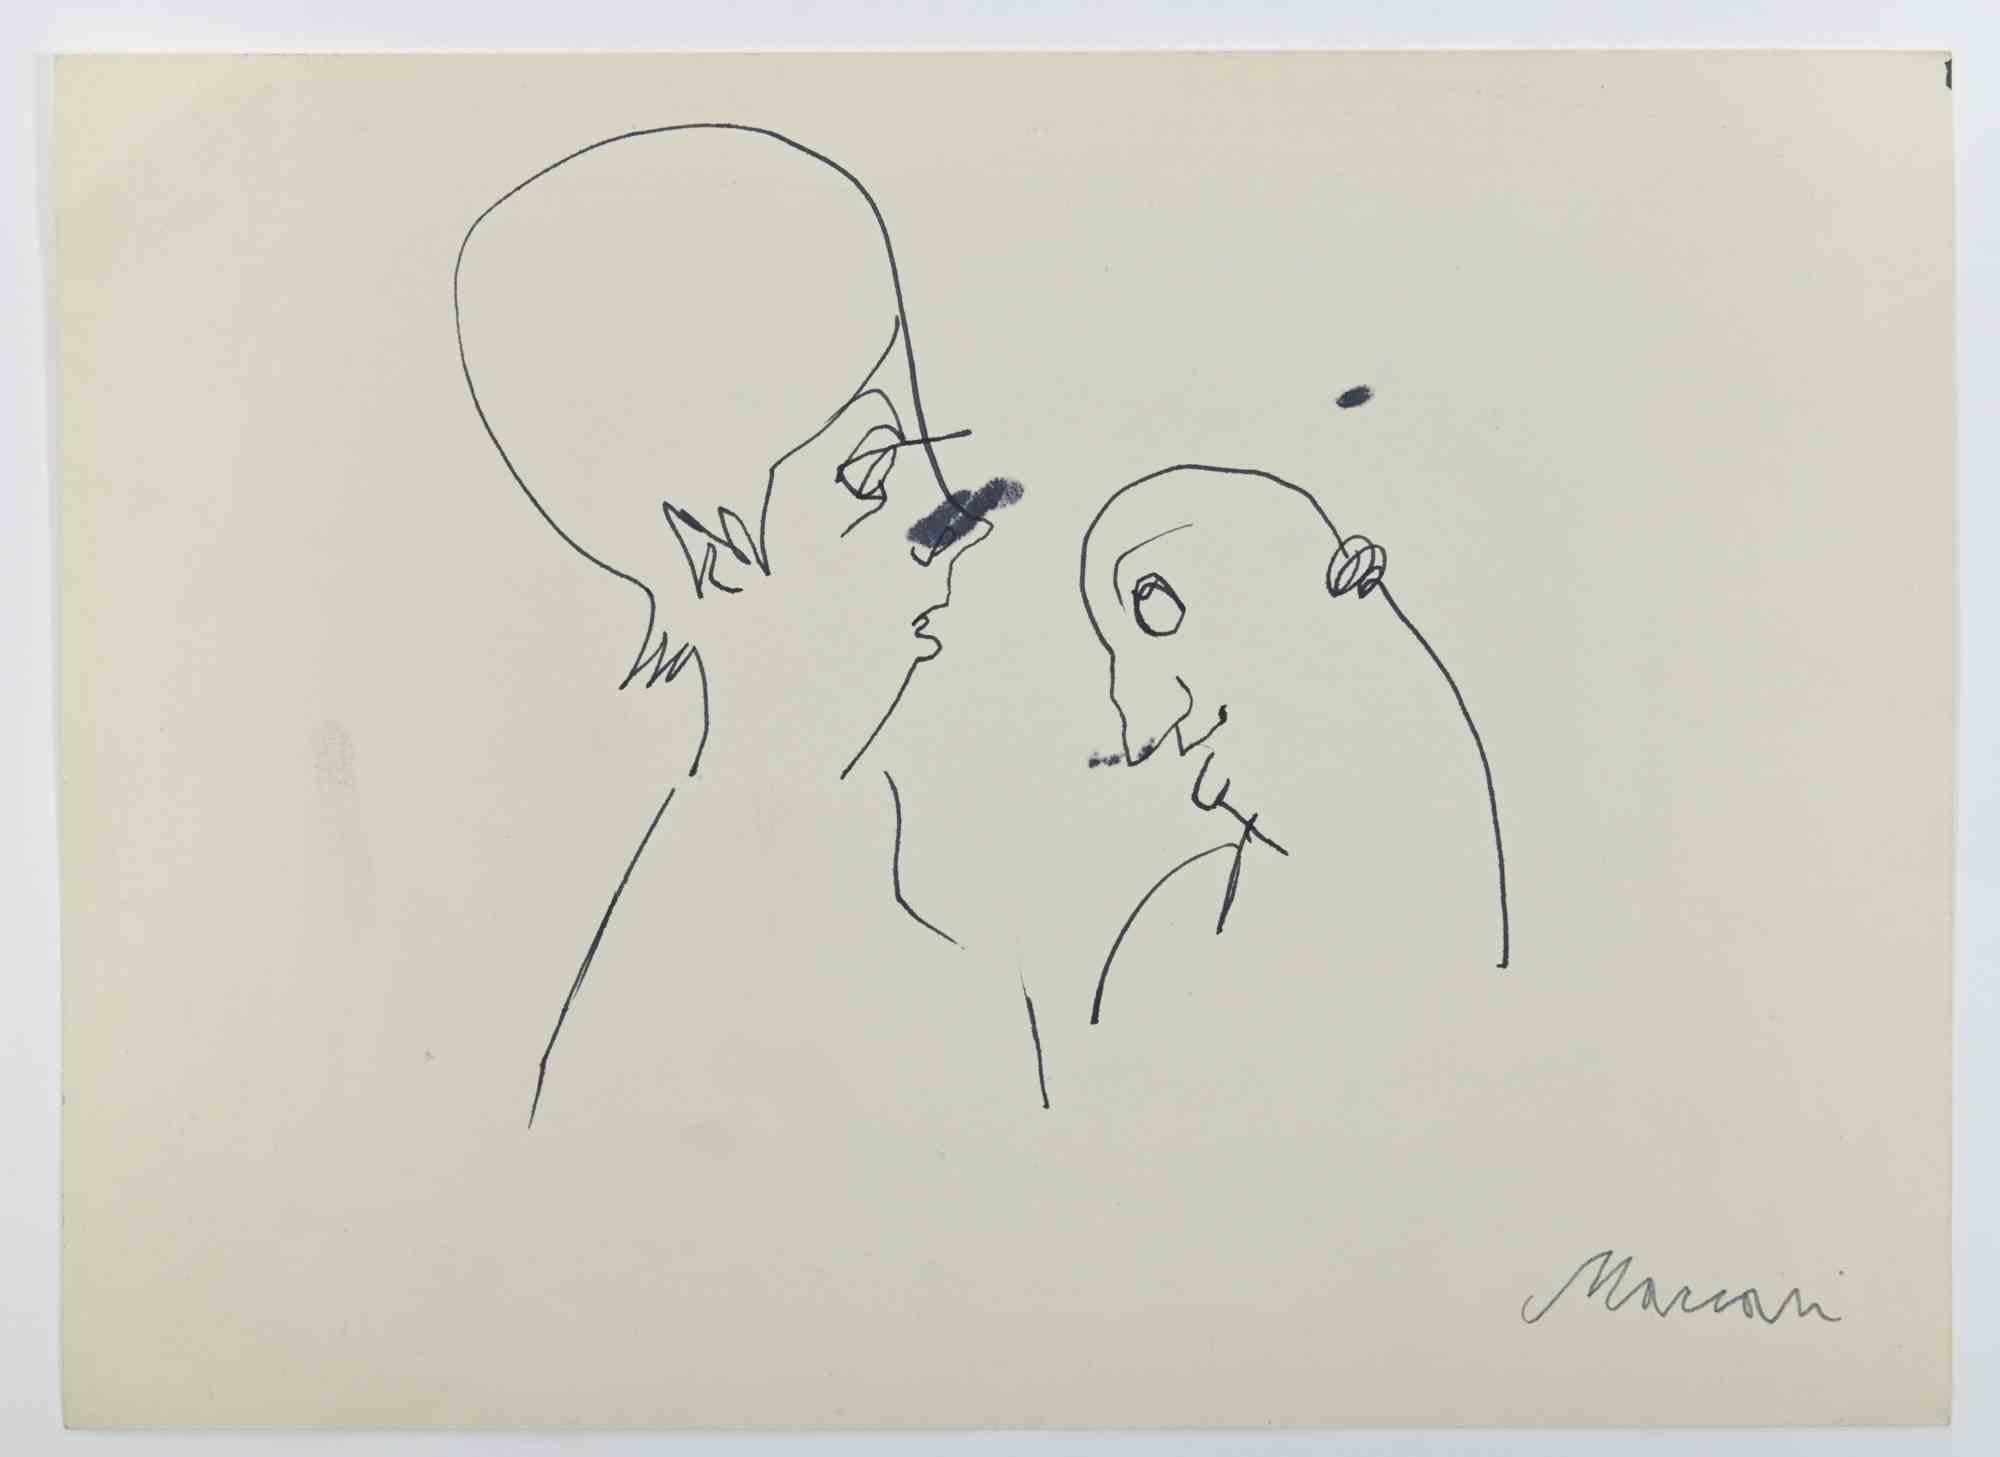 Profiles is a China Ink Drawing realized by Mino Maccari  (1924-1989) in the 1950s.

Hand-signed on the lower.

Good condition.

Mino Maccari (Siena, 1924-Rome, June 16, 1989) was an Italian writer, painter, engraver and journalist, winner of the